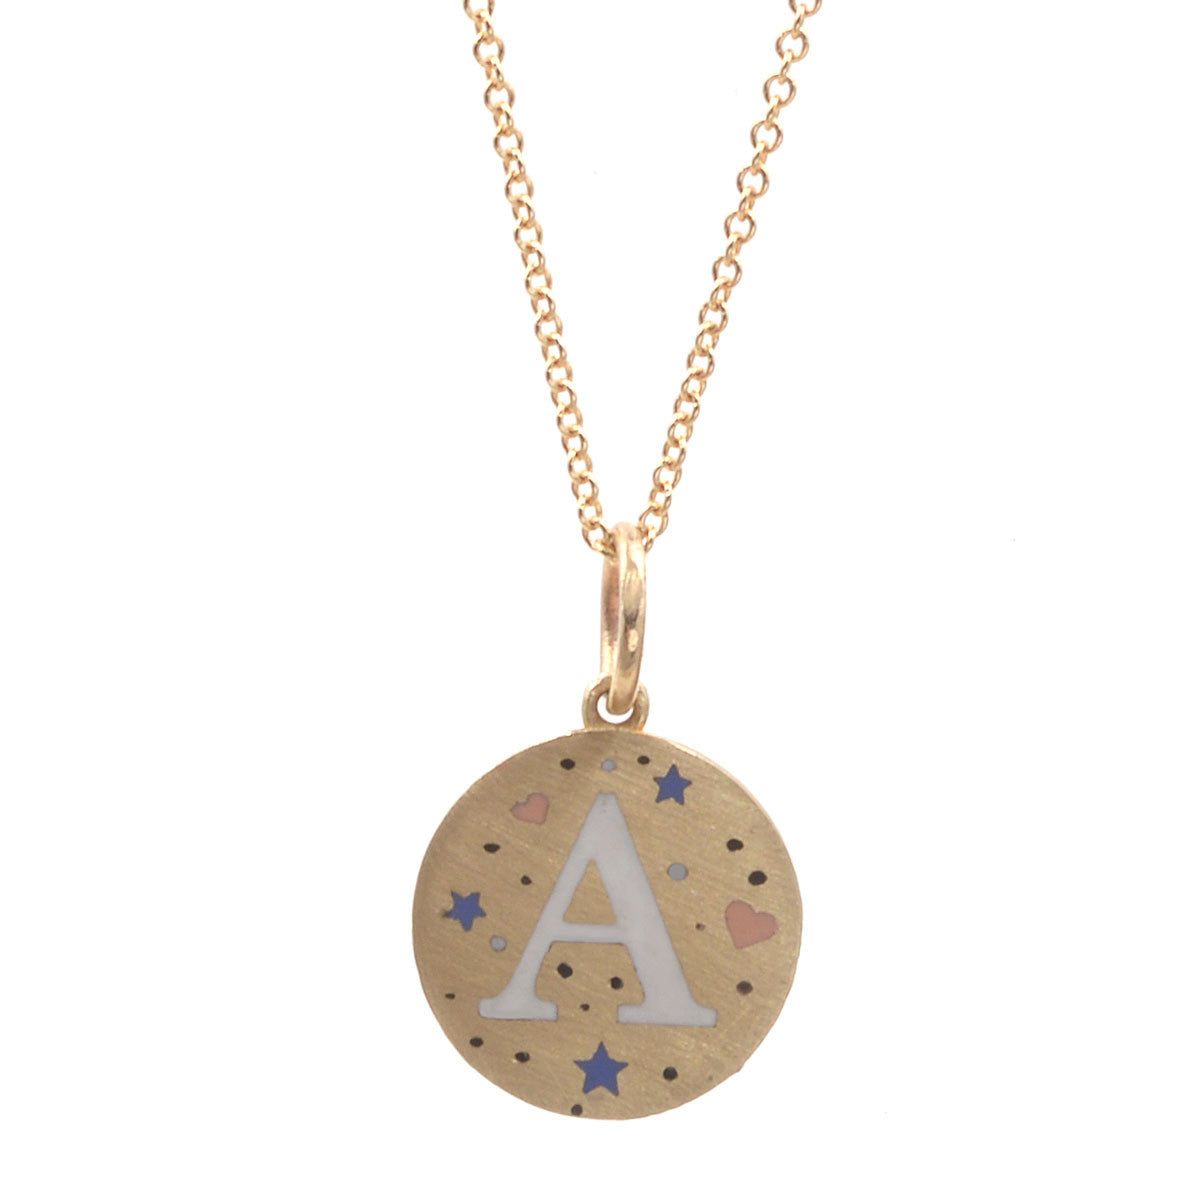 Custom Enamel Speckled Initials Necklace